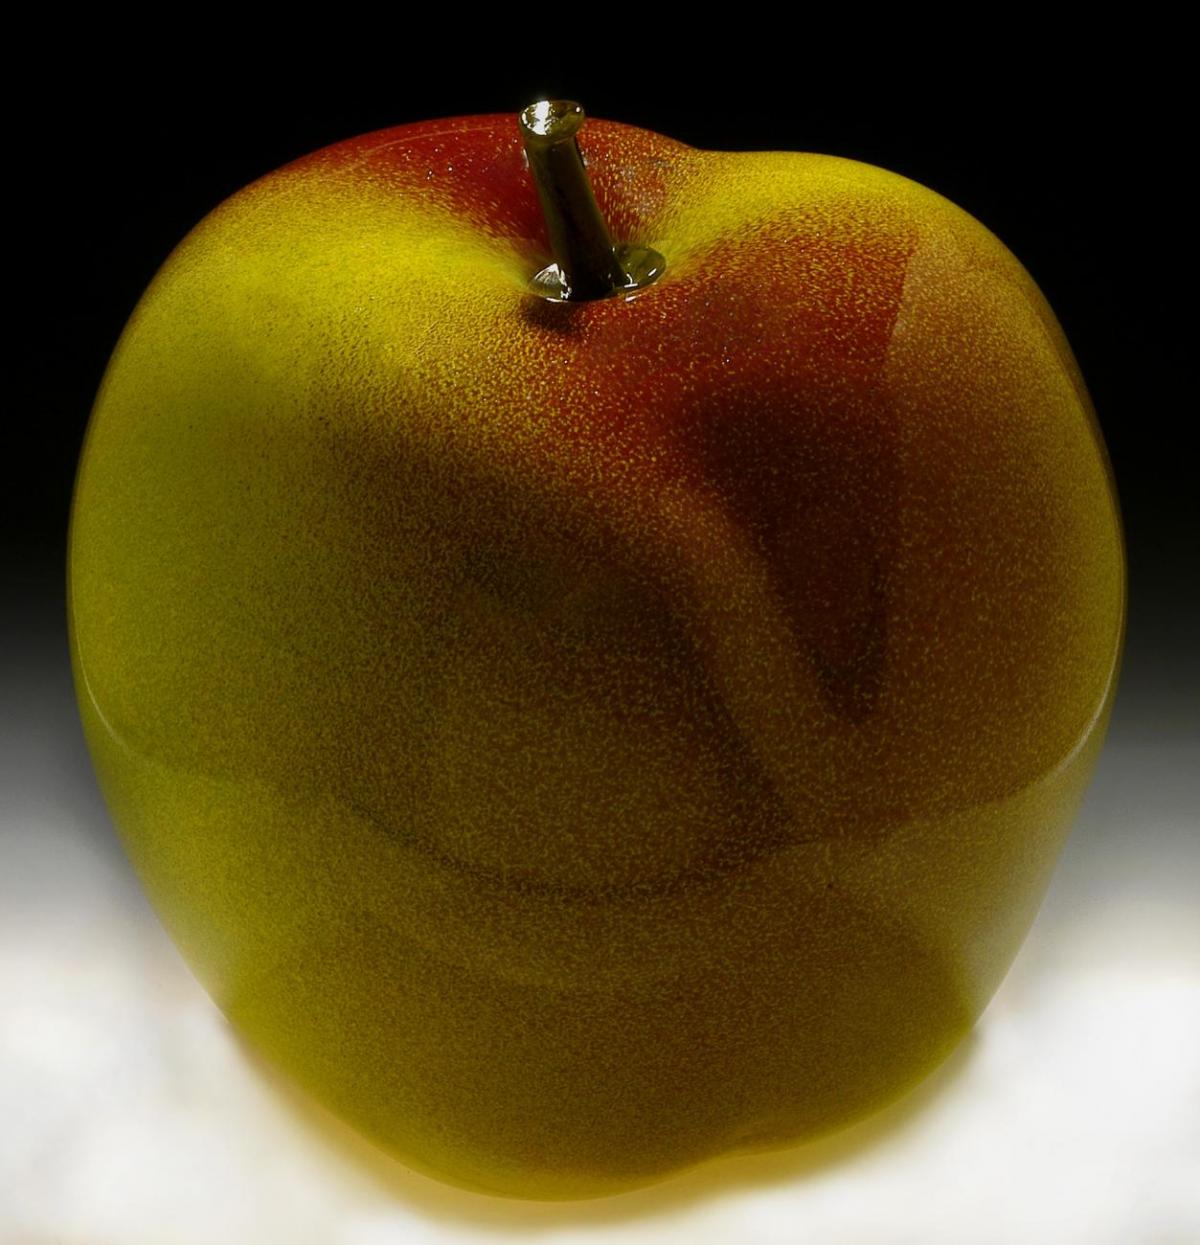 A photograph of a large apple made of glass.